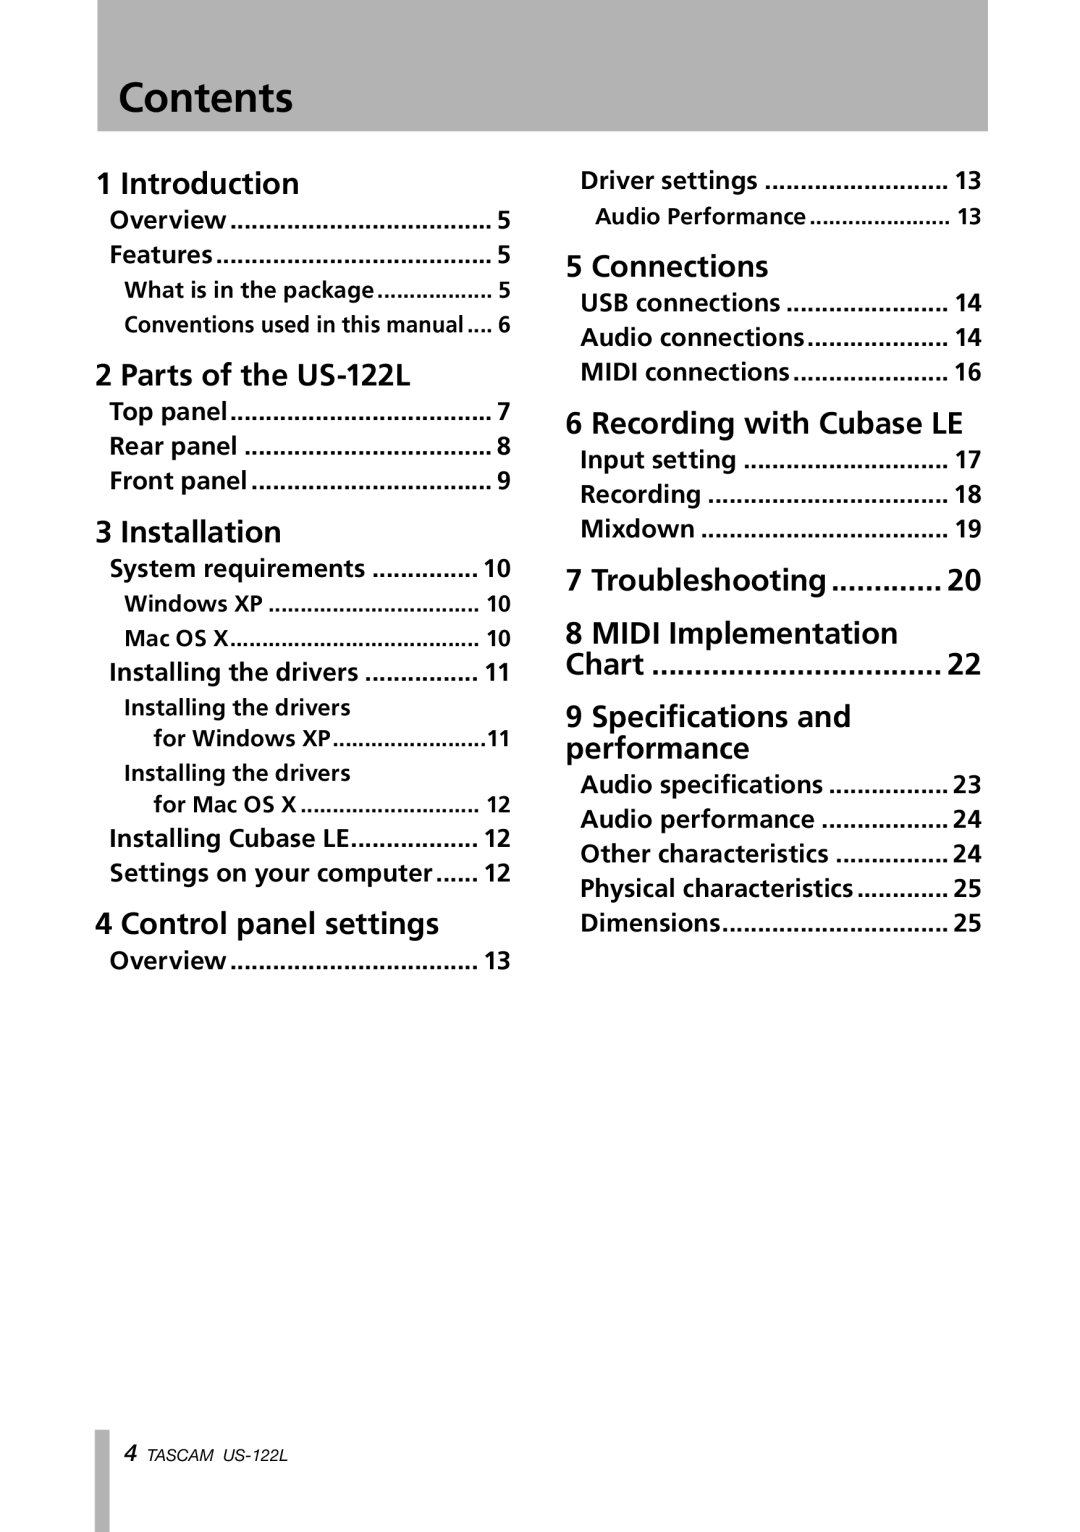 Tascam Contents, Introduction, Parts of the US-122L, Installation, Control panel settings, Connections, Chart 